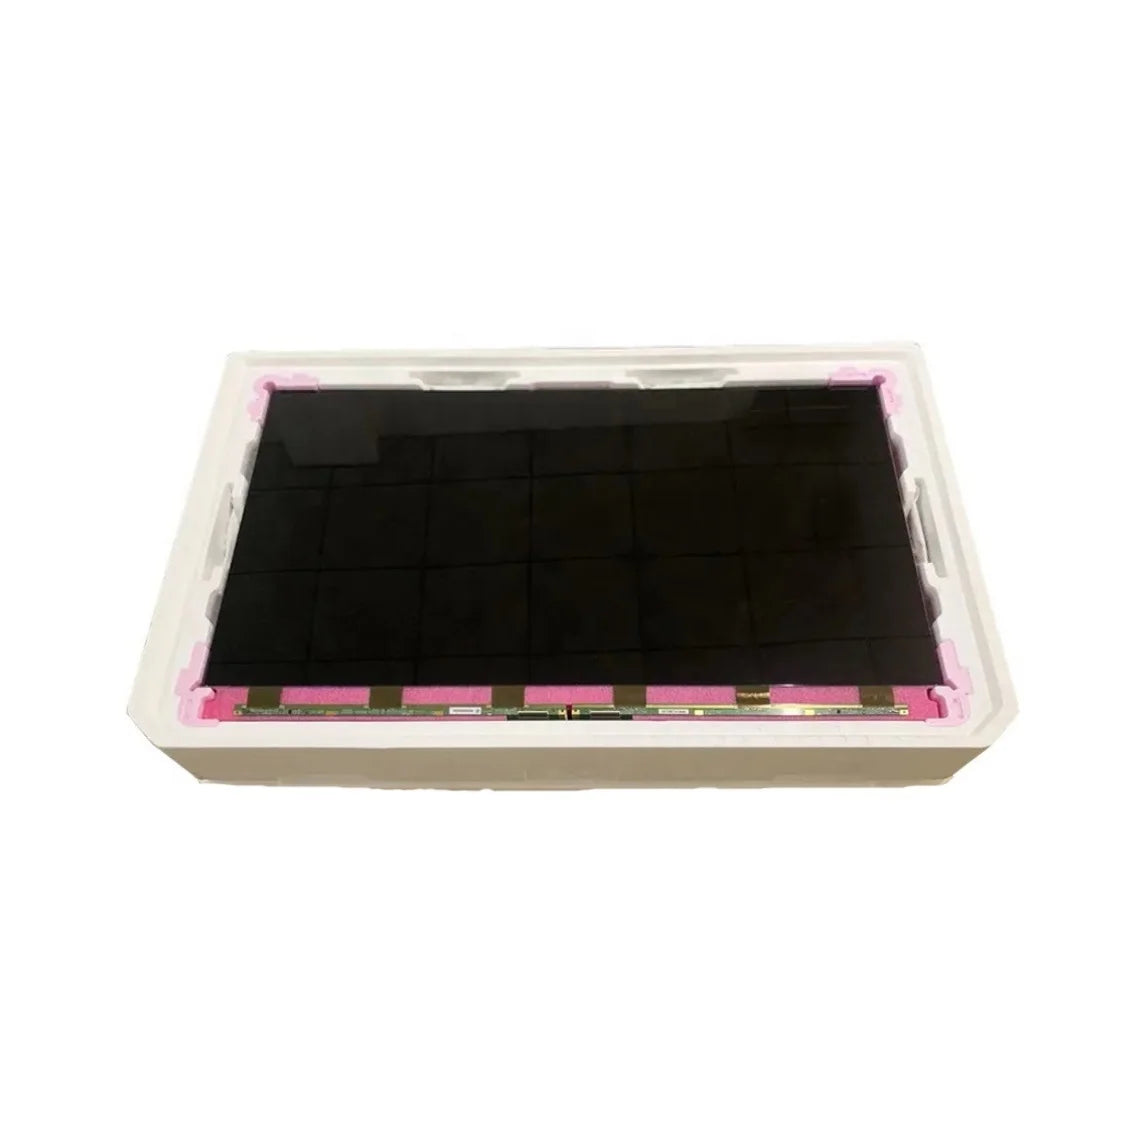 HV430QUB-F1K 51 pins BOE 43" inch LCD LED TFT Display Open Cell TV Screen Spare Panel Replacement Parts for TV Repair